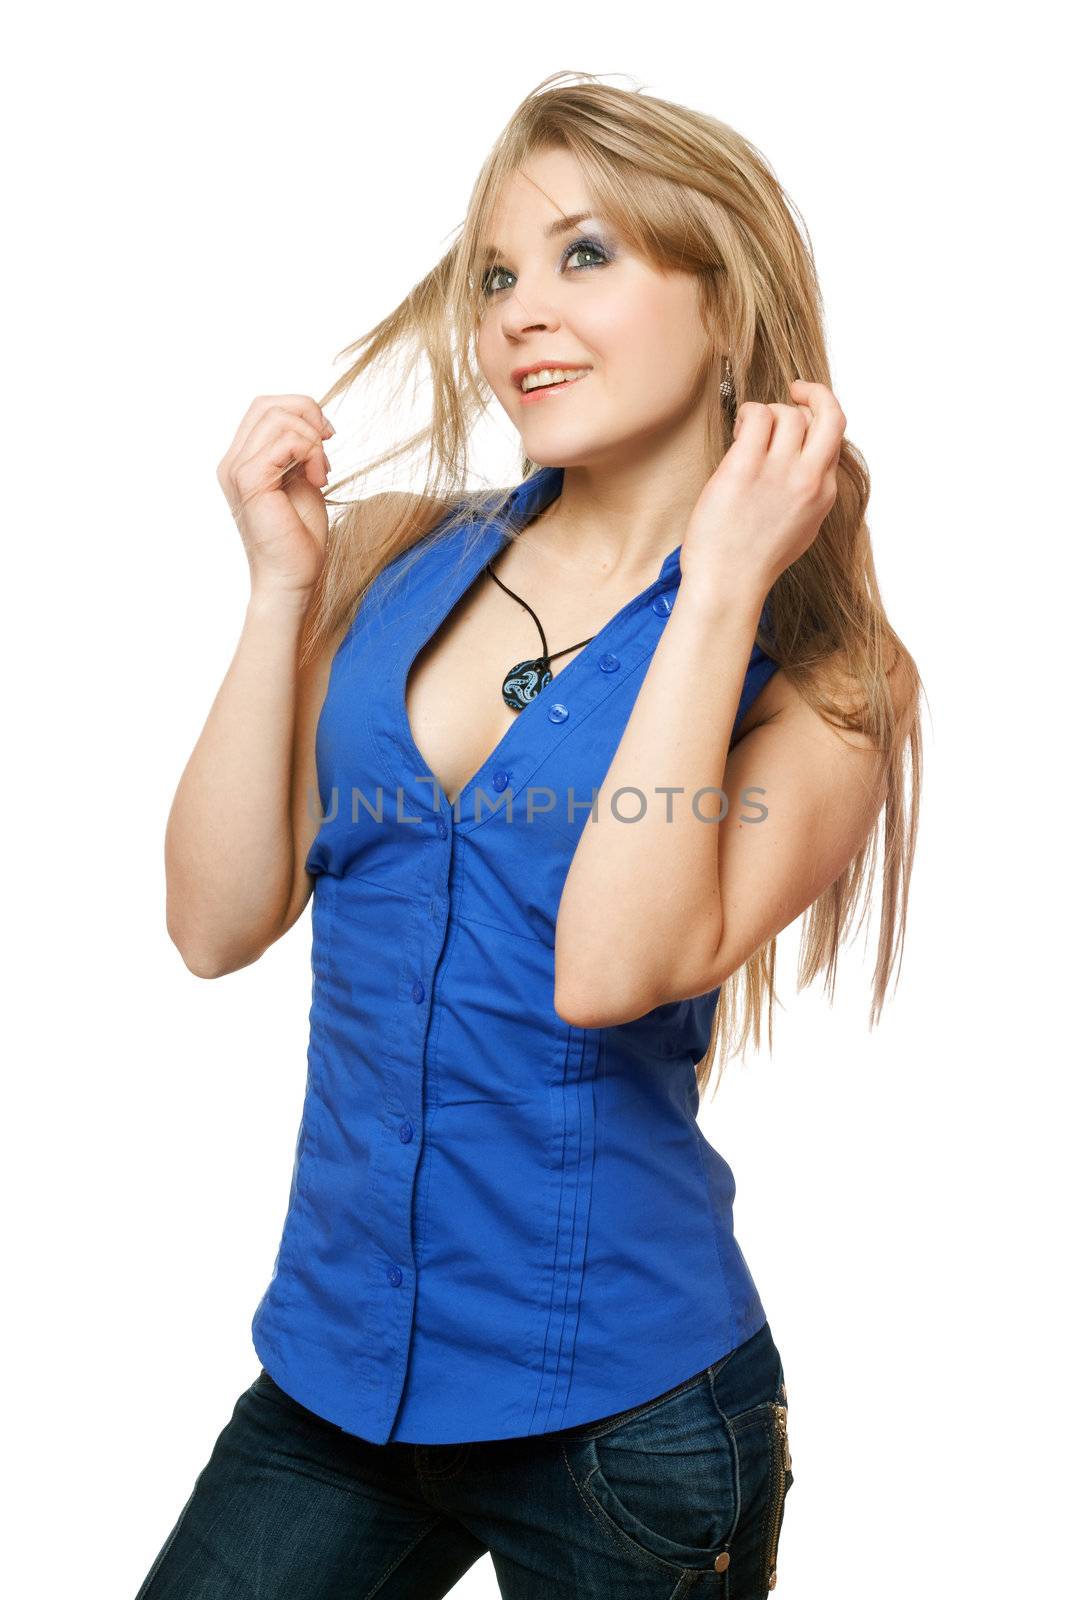 Portrait of playful young blonde in blue blouse